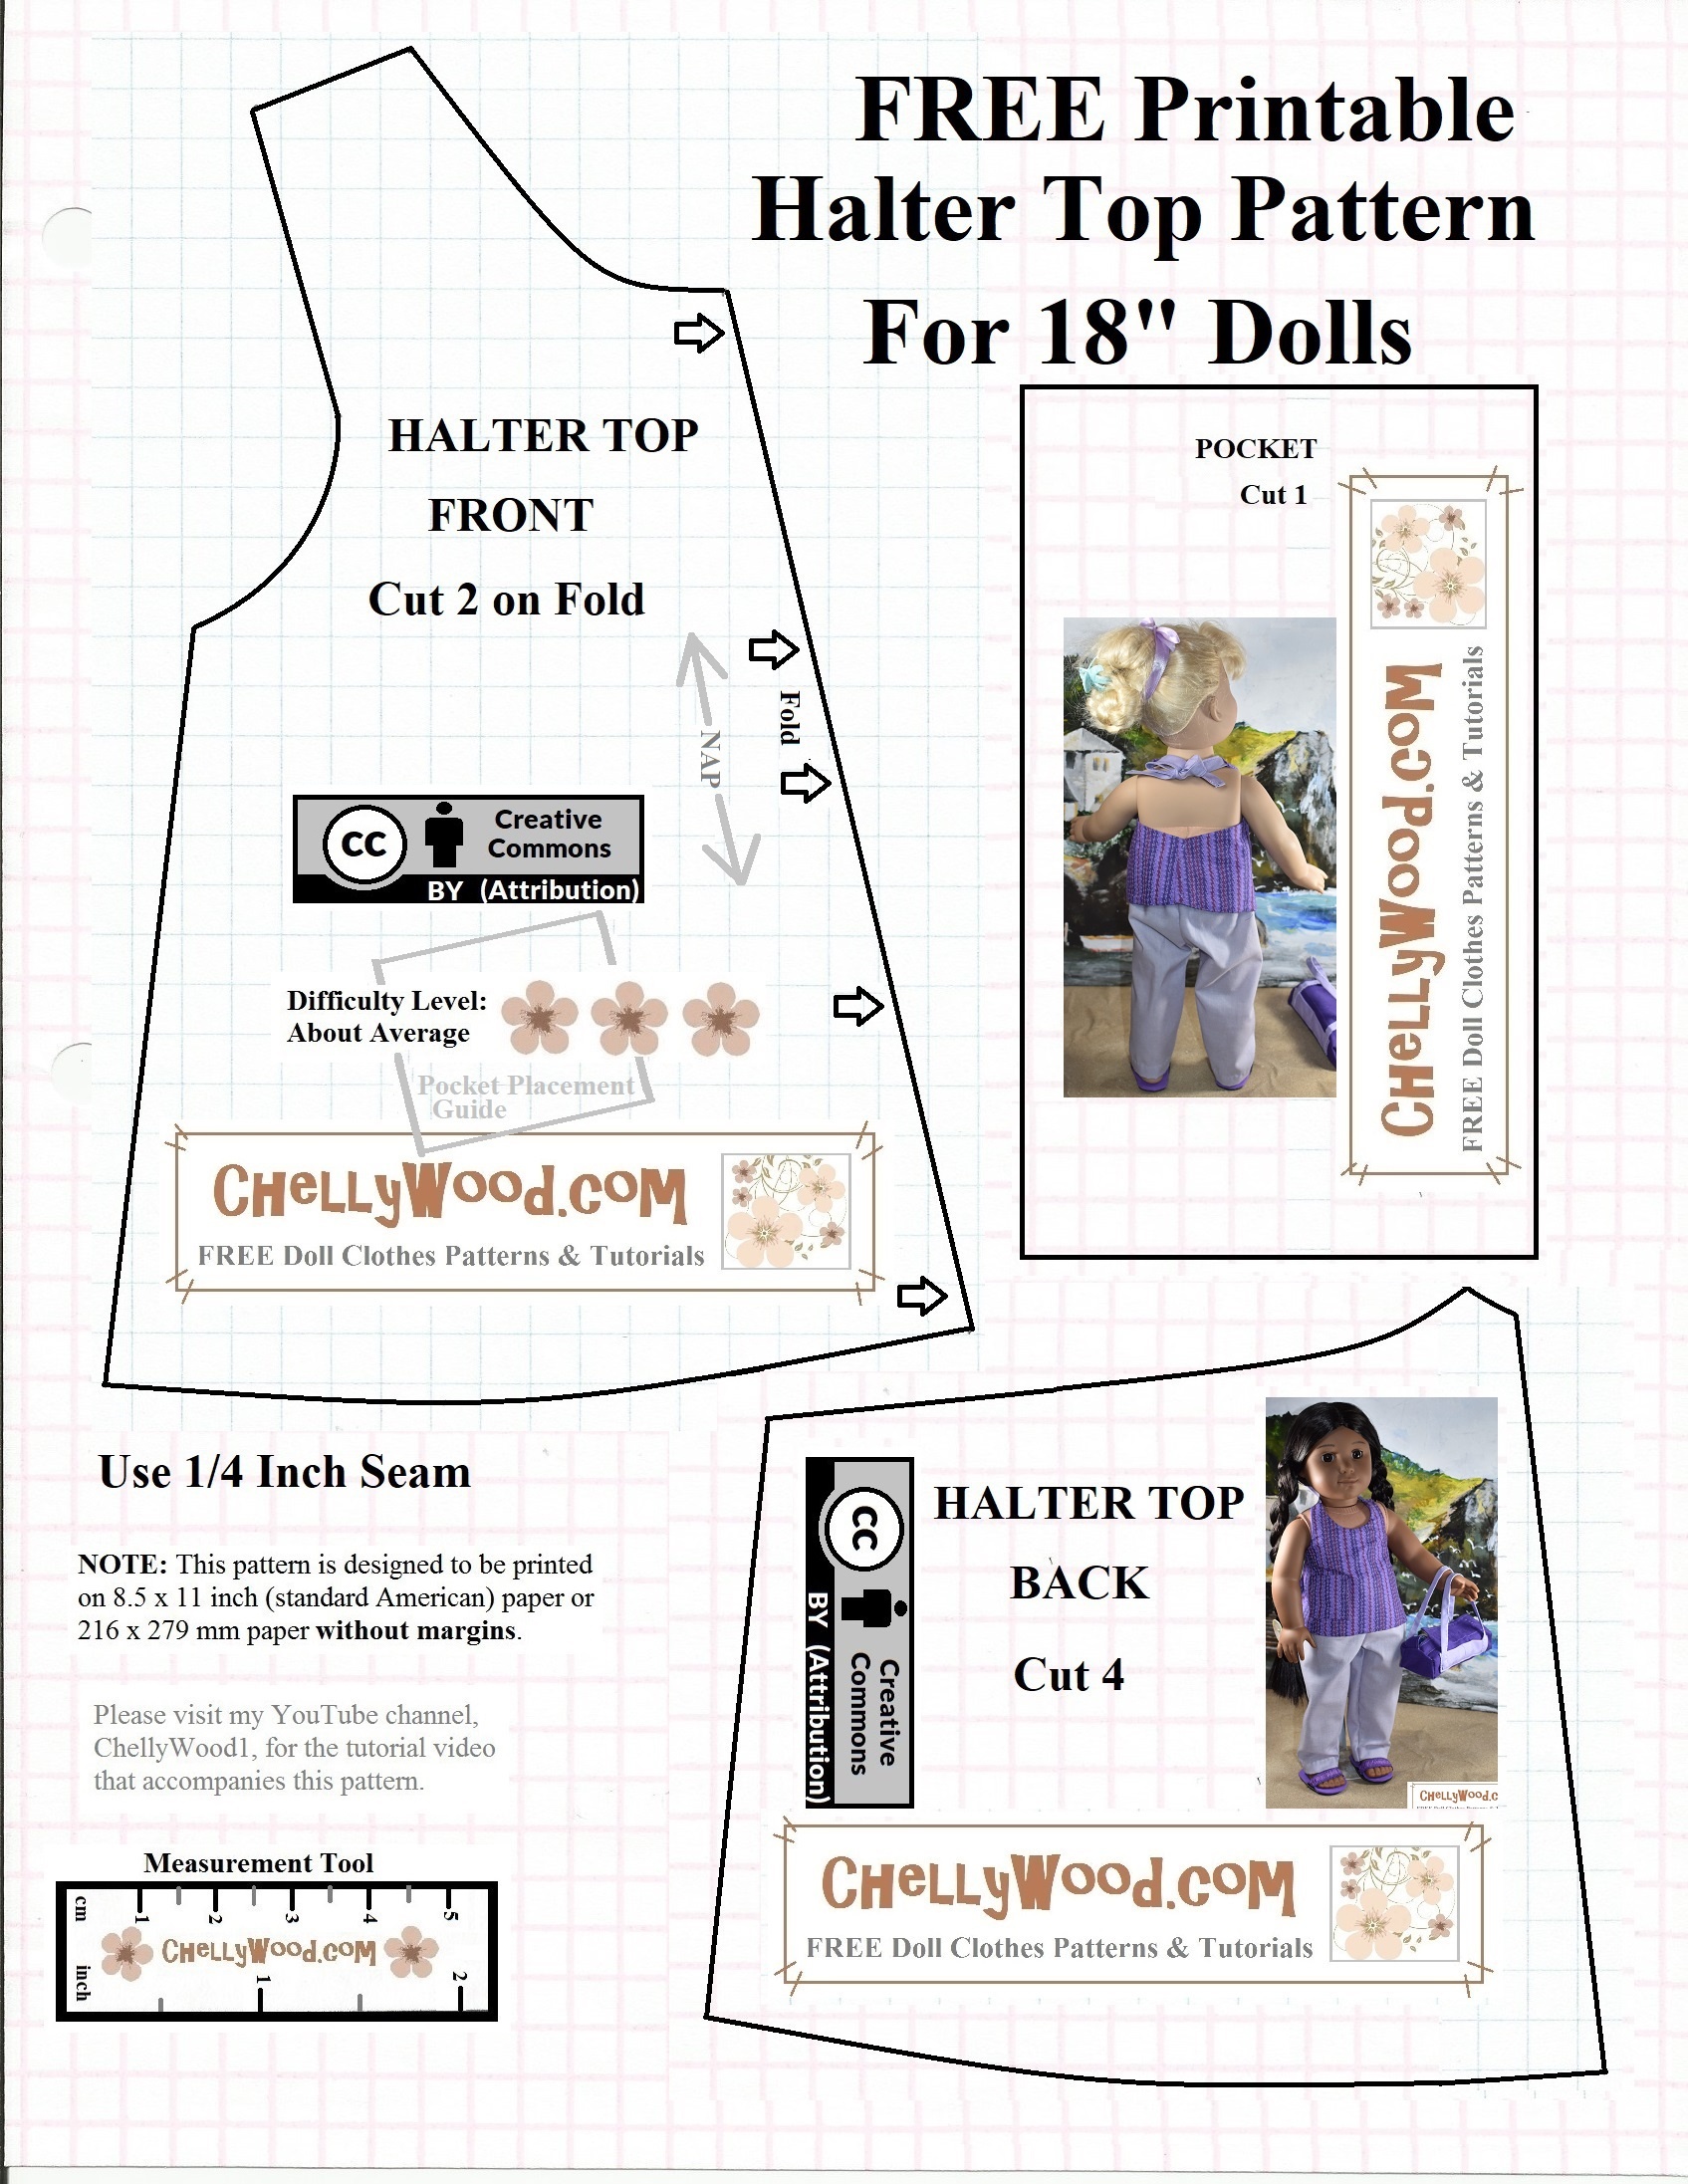 Free #agdoll Summer Shirt Pattern @ Chellywood #sewing 4#dolls - American Girl Clothes Patterns Free Printable